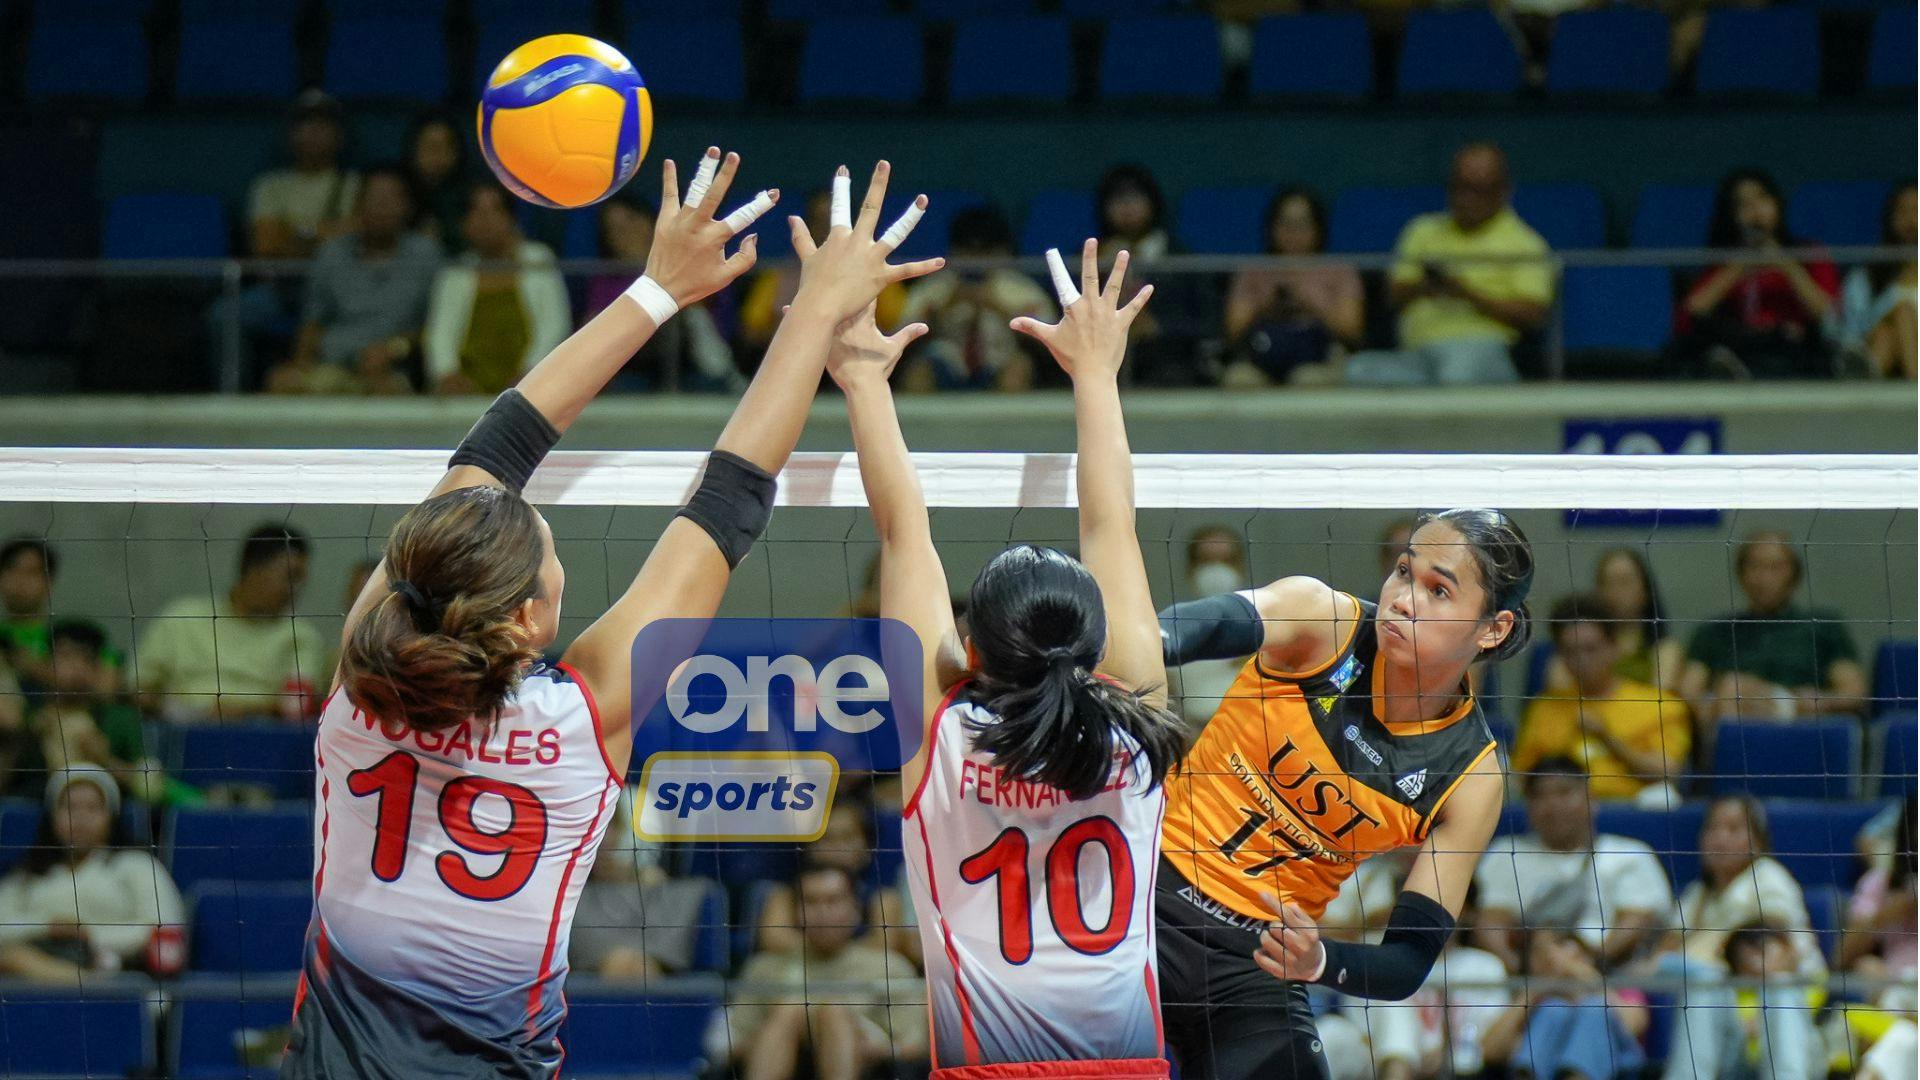 UAAP: Angge Poyos dominates as UST sweeps UE to regain share of first